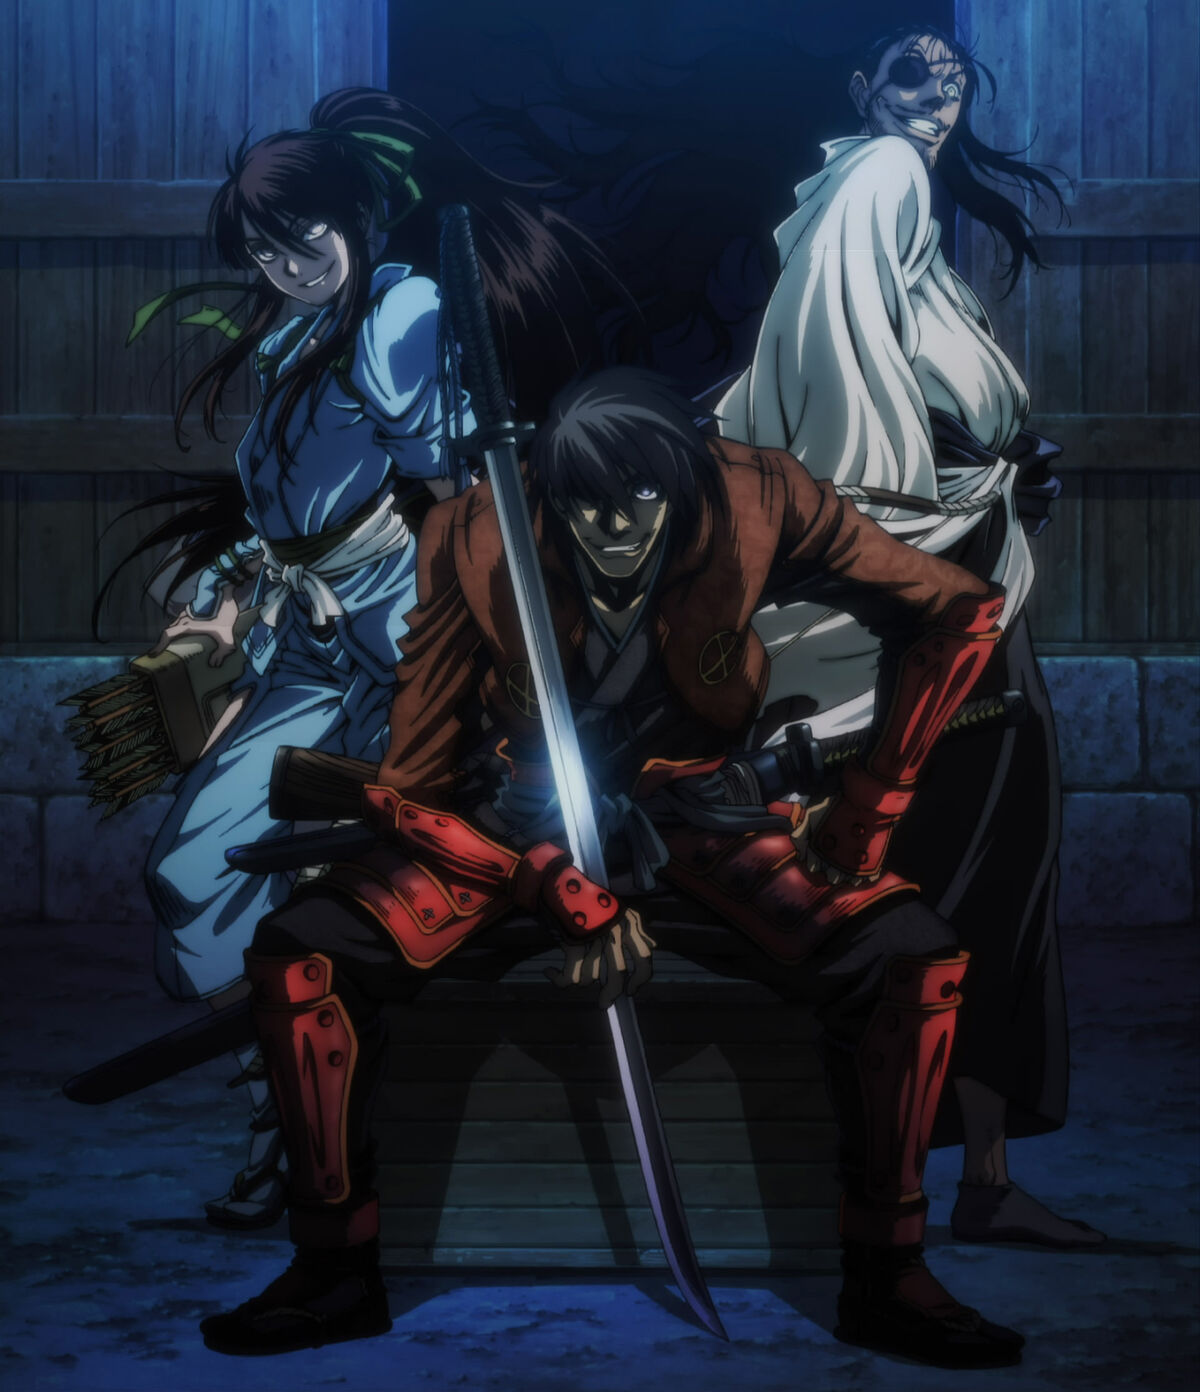 Drifters - Battle in Gadolka, We're counting down our TOP 3 BATTLES in  Drifters leading up to Friday's finale 🔥, By Crunchyroll